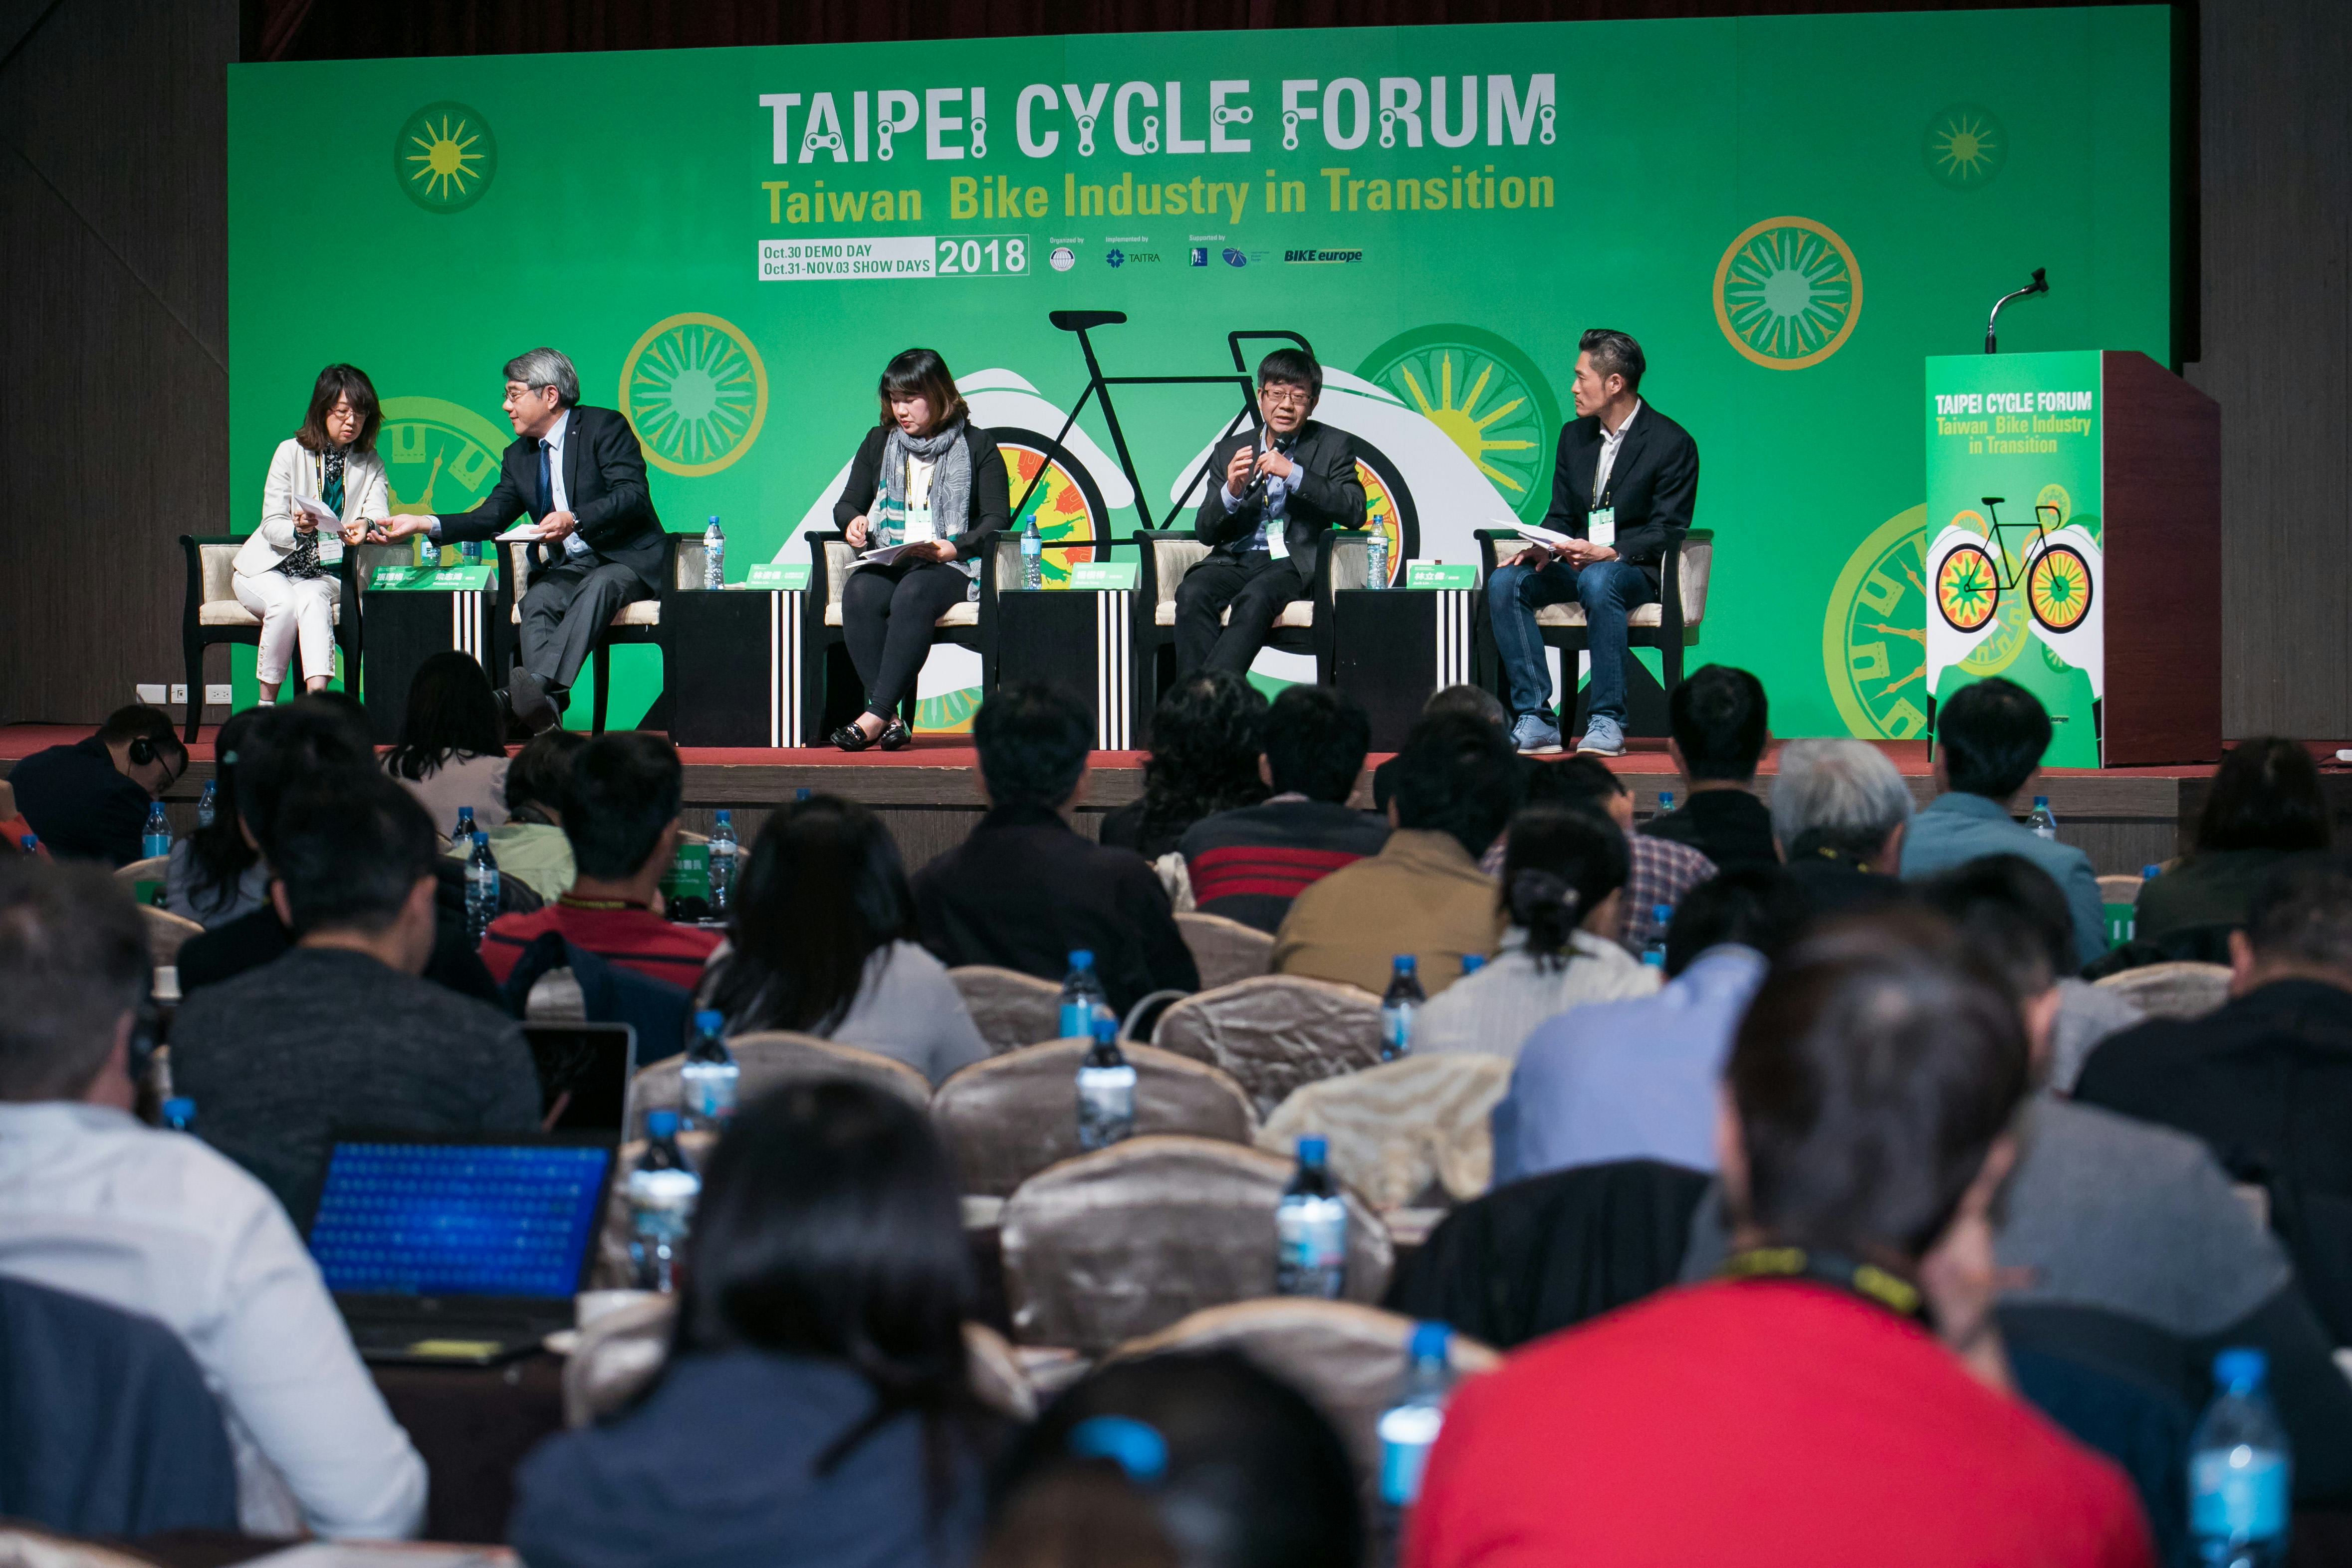 Forum’s 250 participants heard visions on how to transition towards online focused business models. – Photo Taipei Cycle Forum 